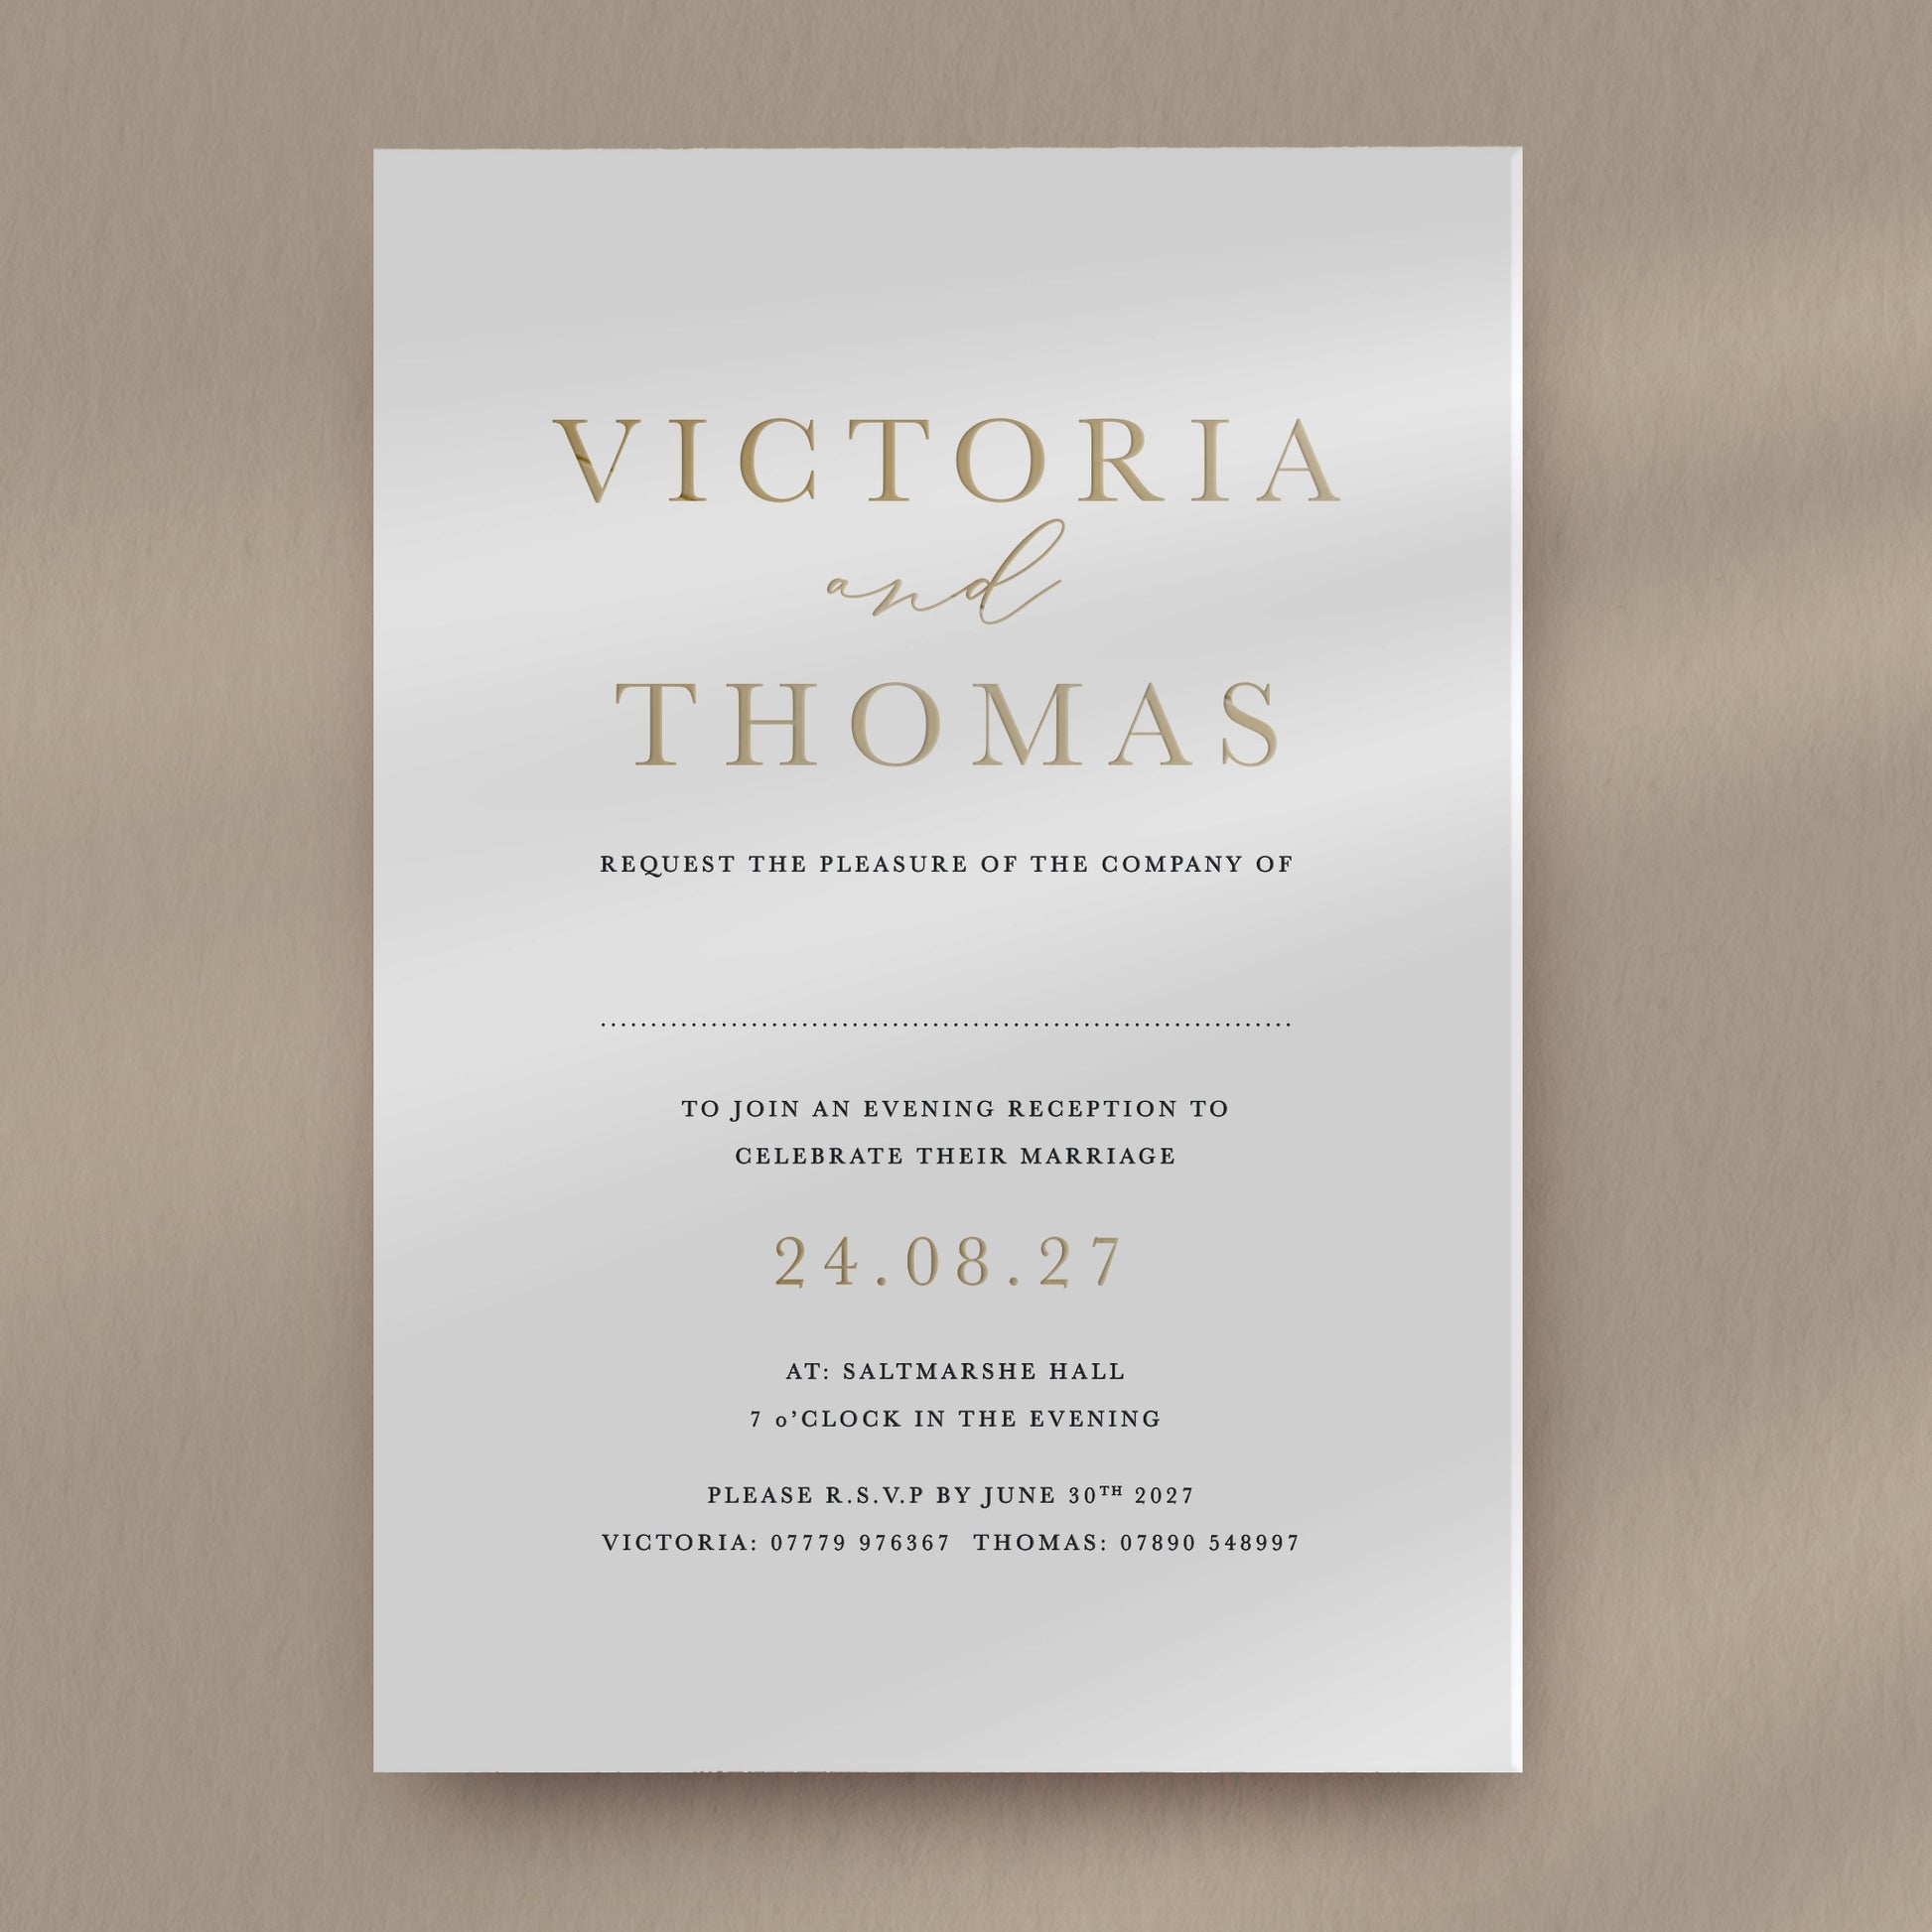 Evening Invitation Sample  Ivy and Gold Wedding Stationery Victoria  